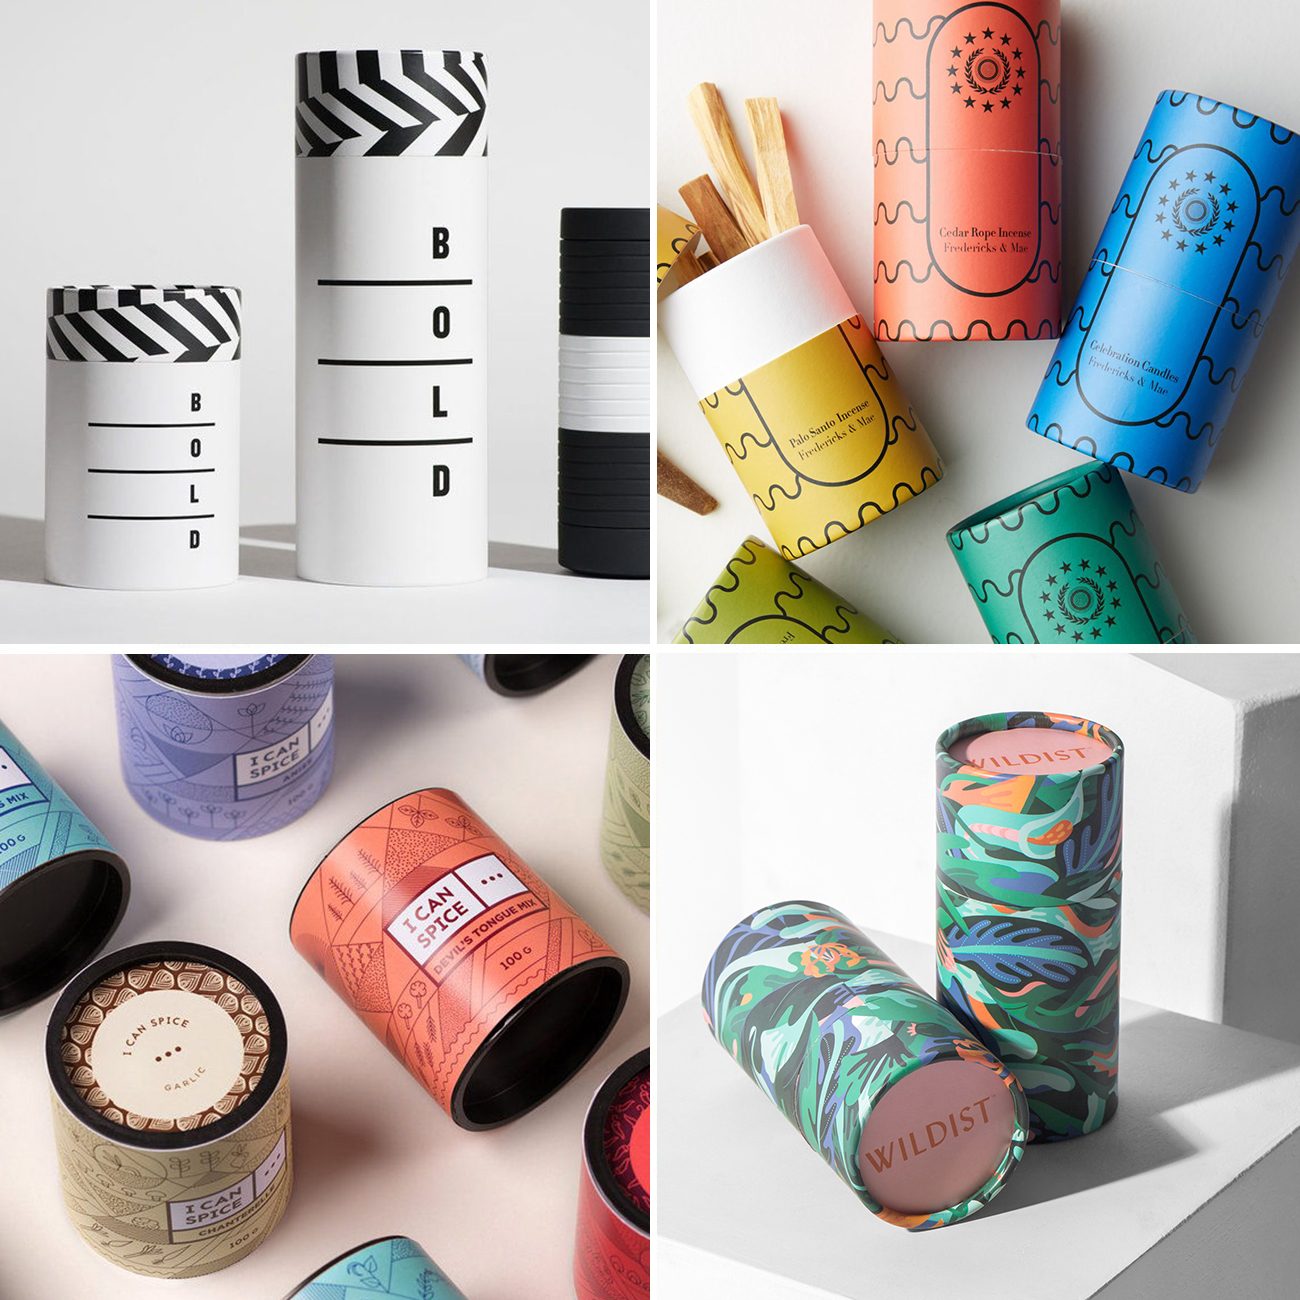 Photos via: Repina Branding, The Dieline, Fredericks and Mae, I Can Spice, Lumi 90 Ideas to Spruce Up Your Holiday Packaging Design